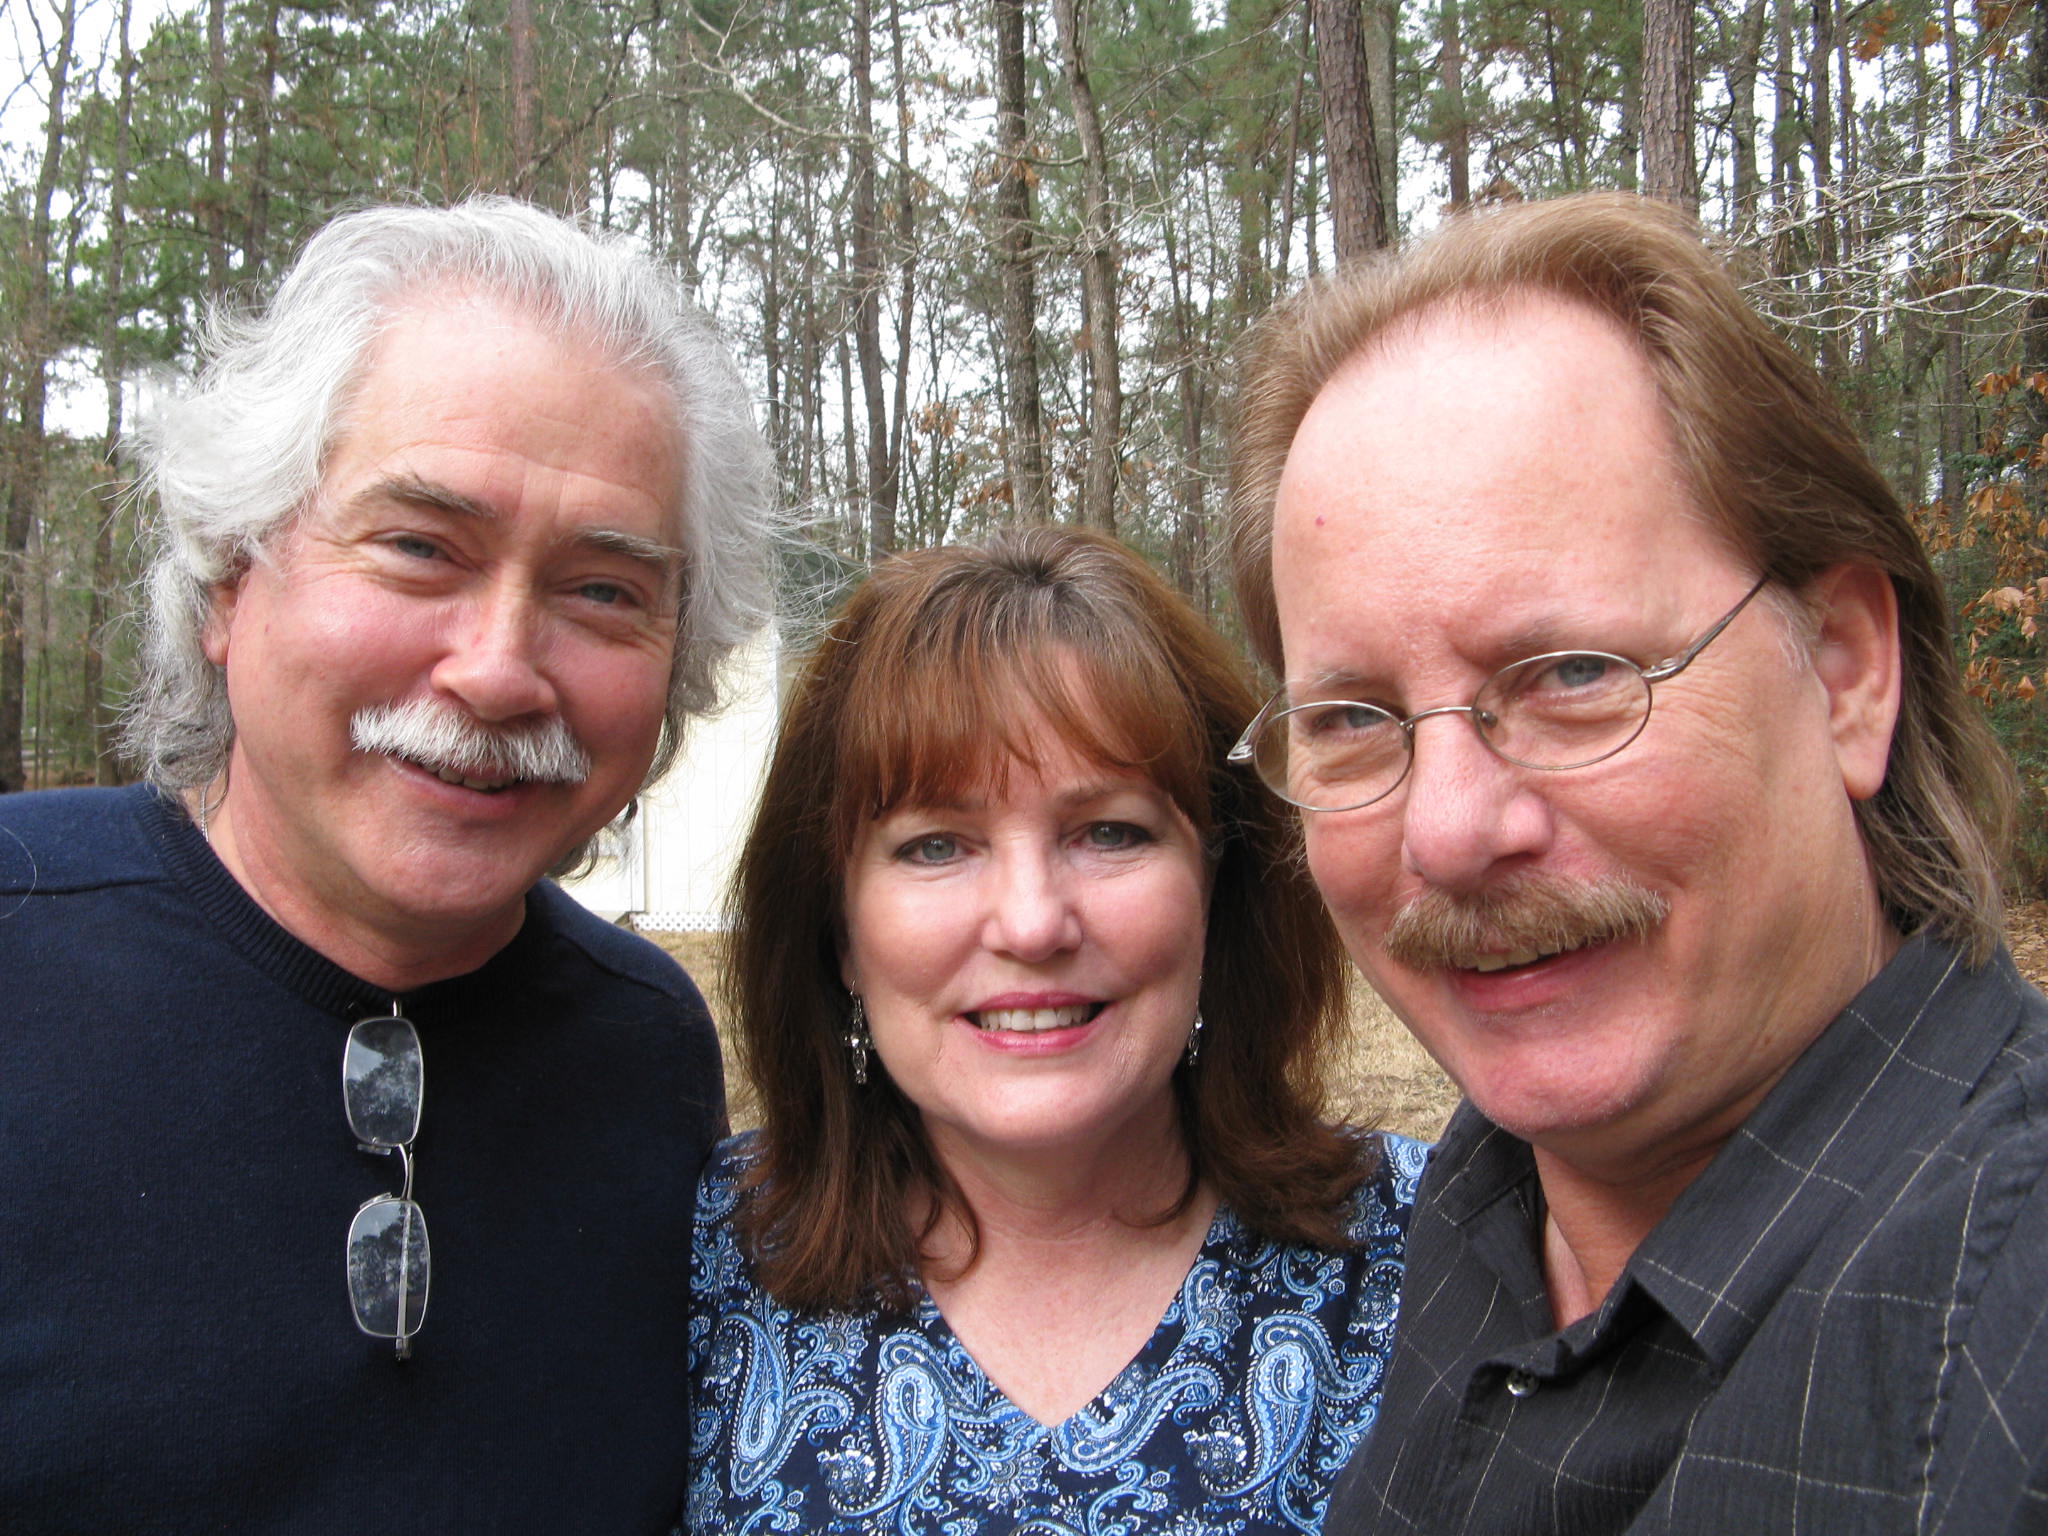 With Sandy and Perry - Texas - February 2011